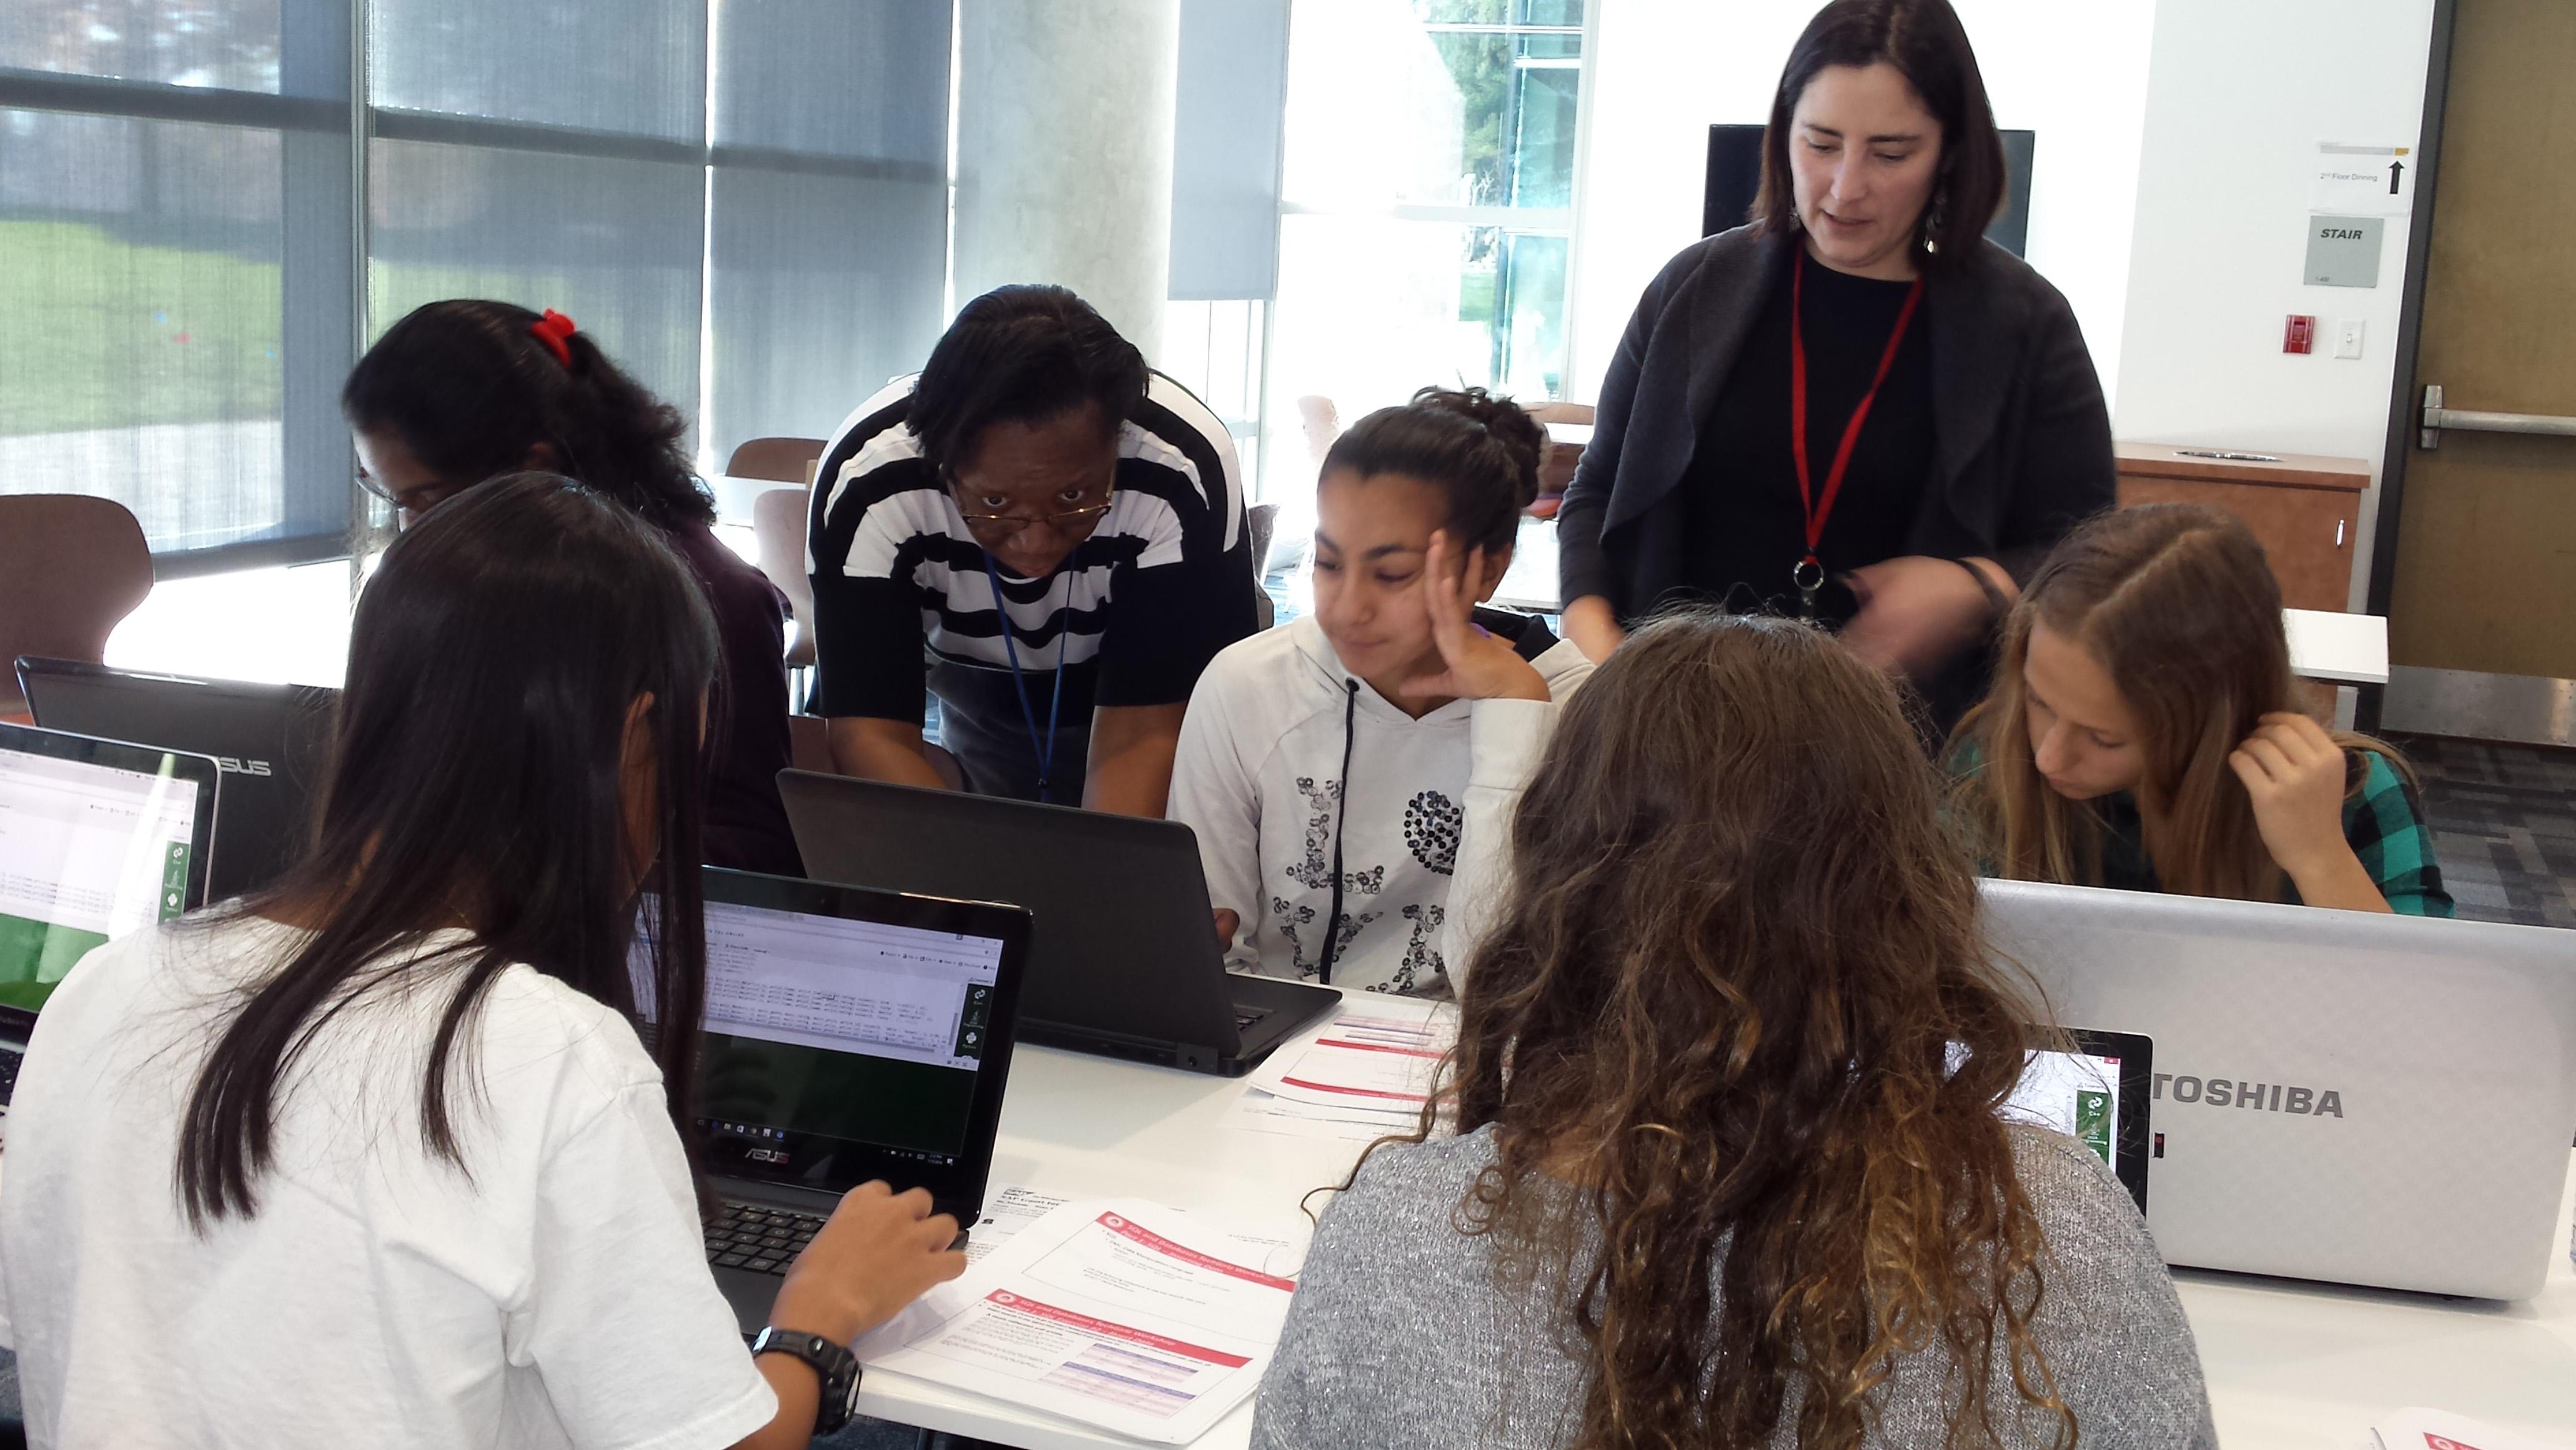 TechGirlz is “dedicated to reducing the gender gap in technology occupations,” according to its website. (Courtesy of Tracey Welson-Rossman)